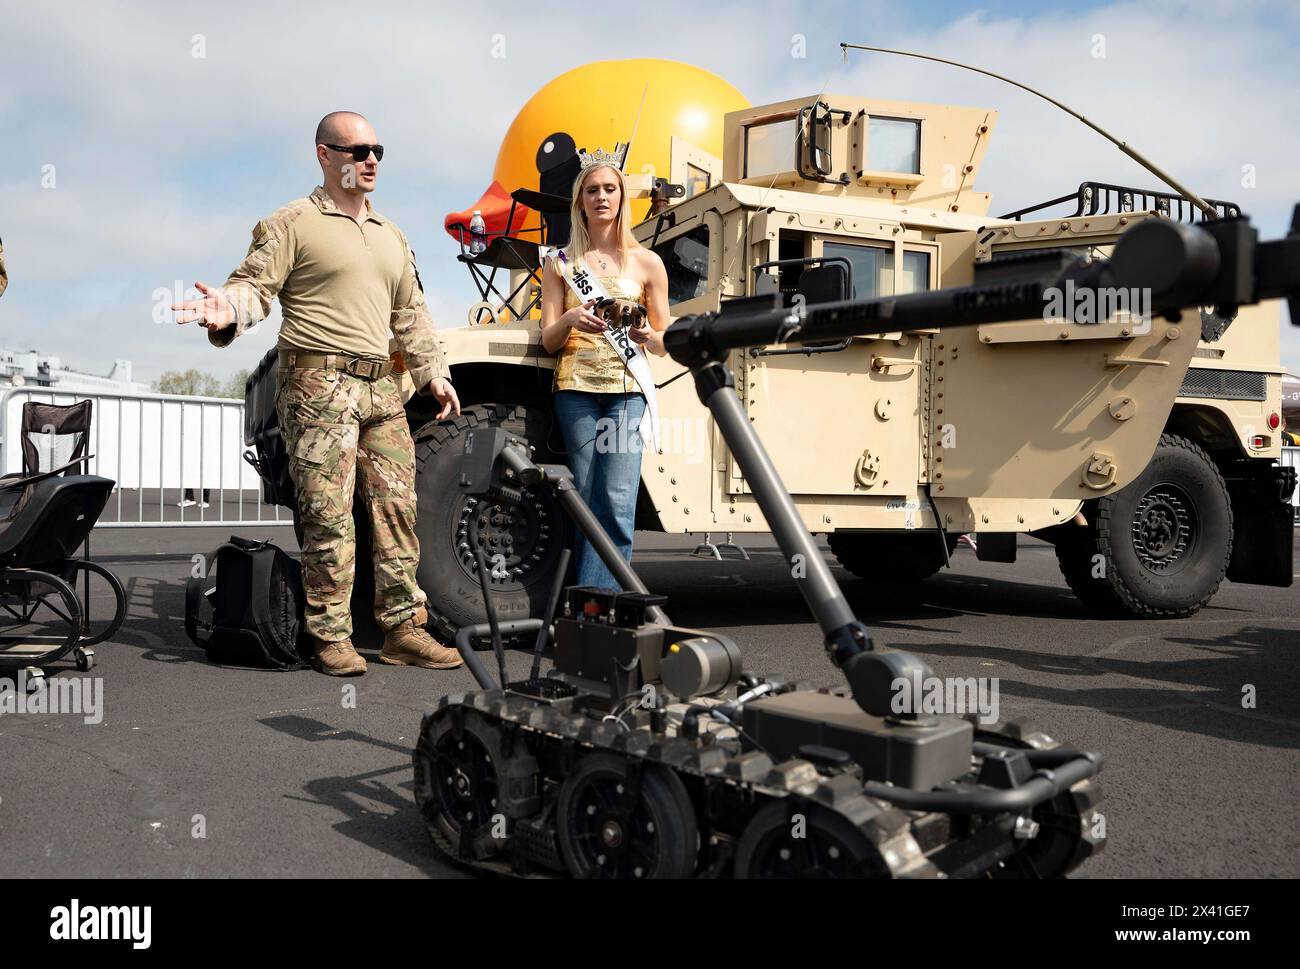 Dover, United States Of America. 28th Apr, 2024. Dover, United States of America. 28 April, 2024. U.S Air Force 2nd Lt. Madison Marsh, Miss America 2024, takes the Explosive Ordnance Disposal robot for a spin at the demo team display before the Würth 400 NASCAR at the Dover Motor Speedway, April 28, 2024 in Dover, Delaware. Marsh, a 22-year-old U.S. Air Force Academy graduate is the first active duty military officer to hold the crown as Miss America. Credit: Miriam Thurber/U.S Air Force Photo/Alamy Live News Stock Photo